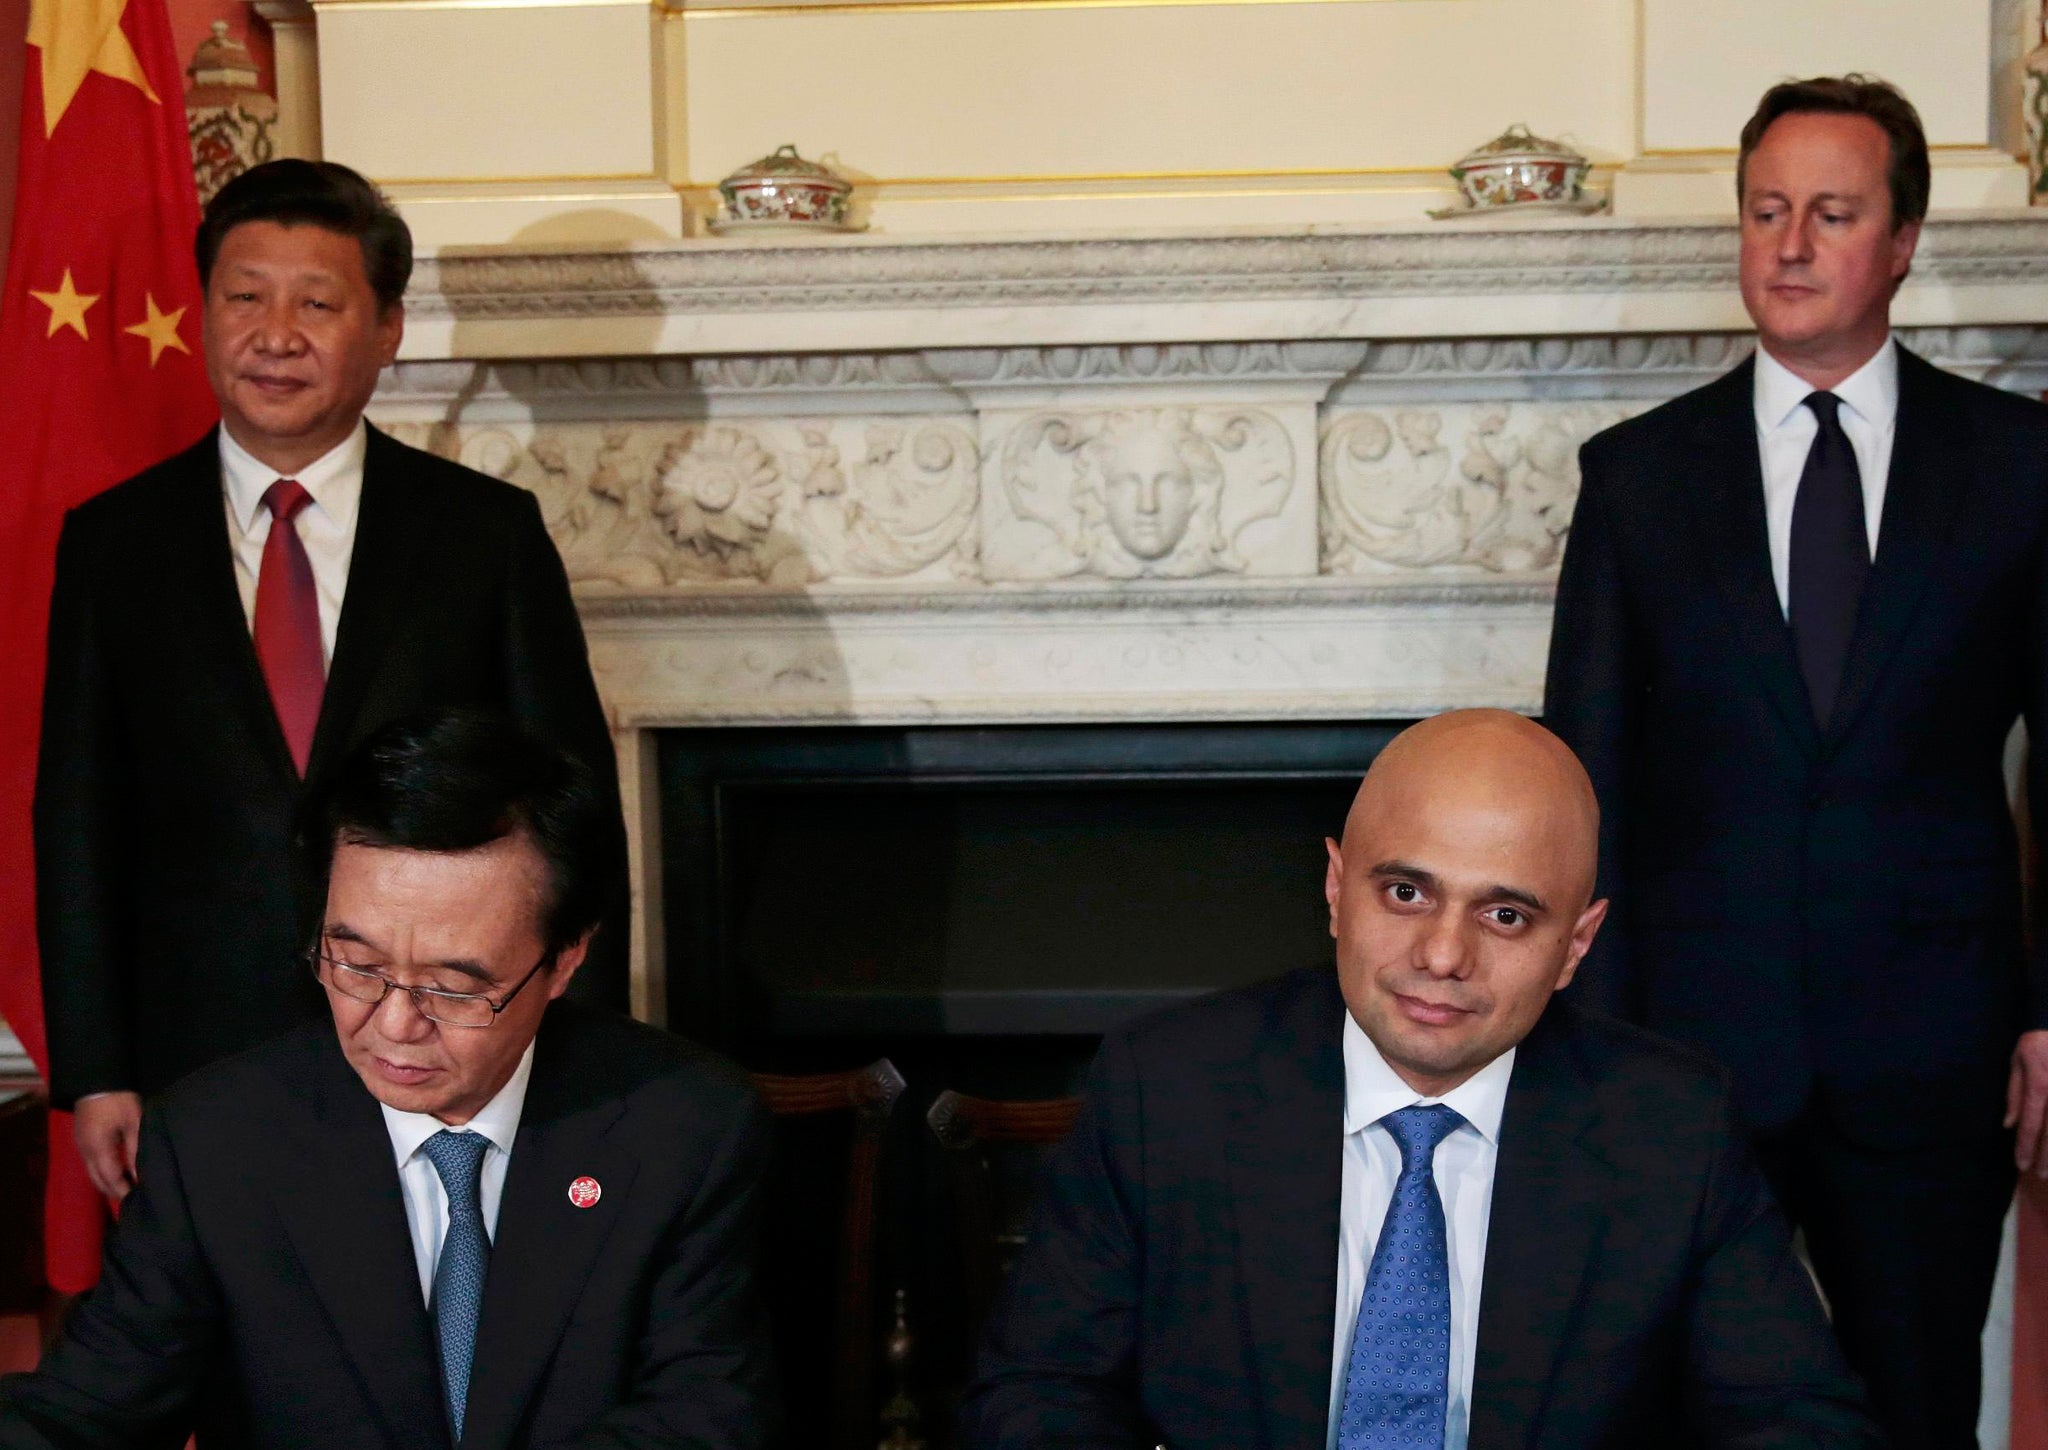 Sajid Javid and China's Gao Hucheng sign an agreement in 10 Downing Street while David Cameron and Xi Jinping look on